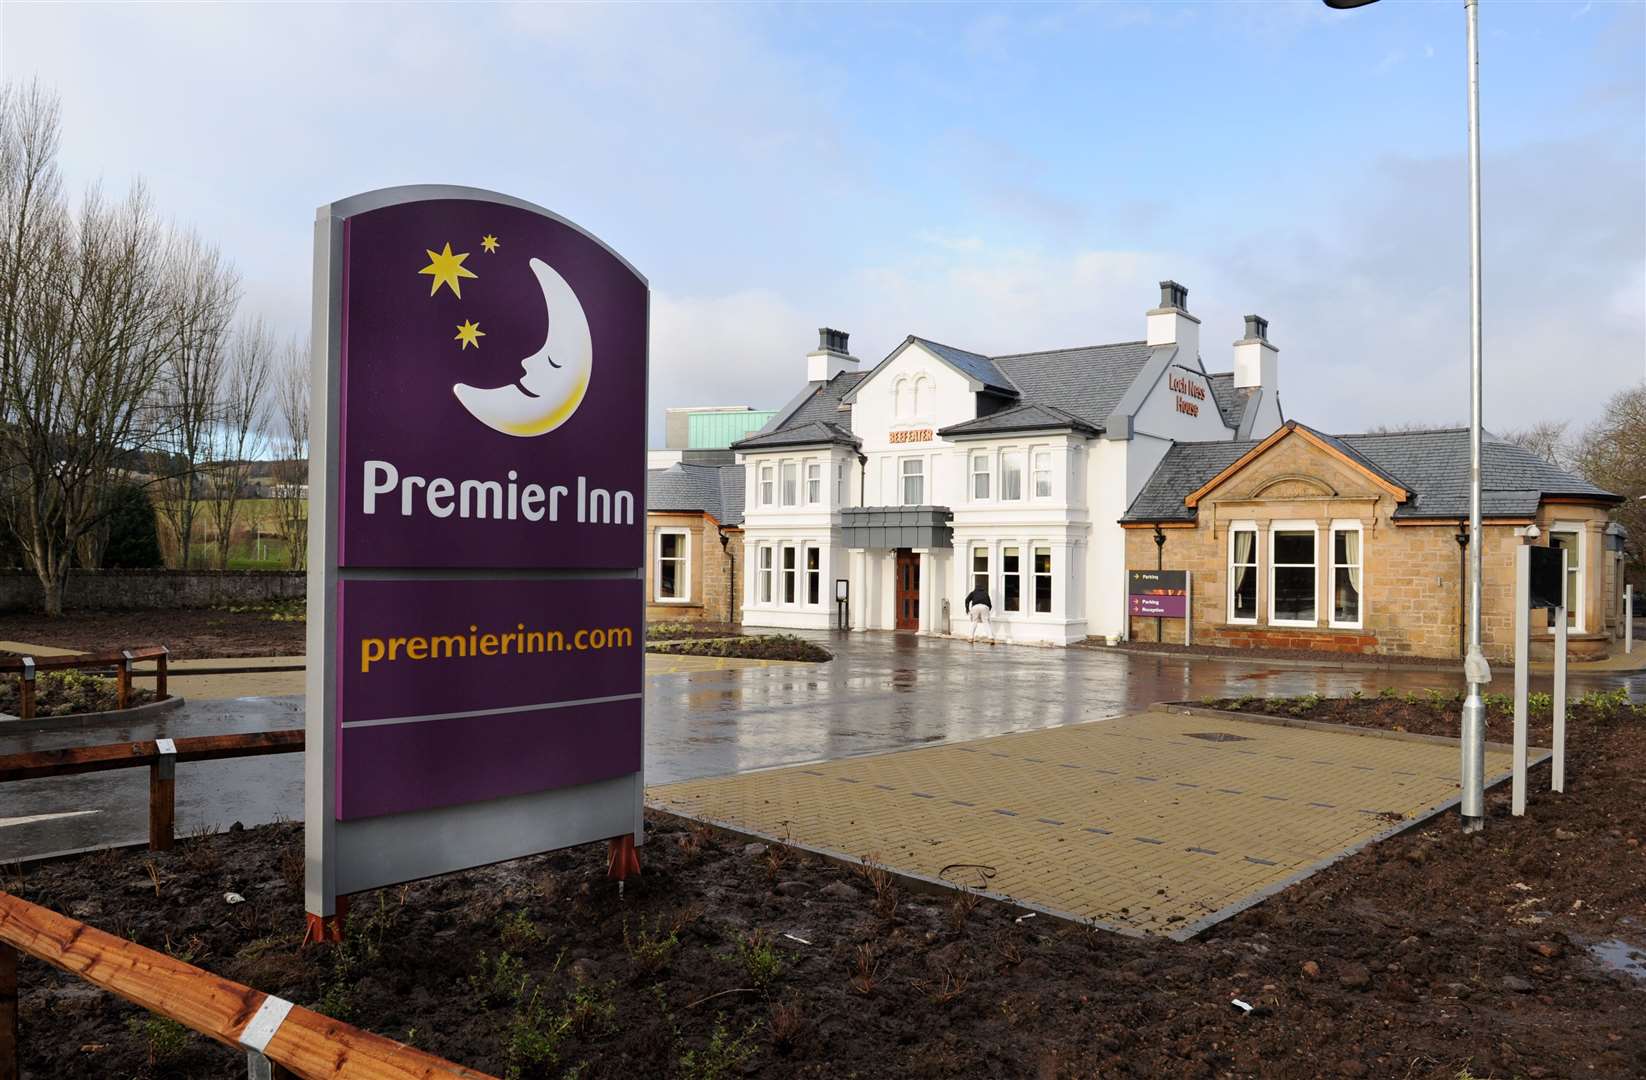 Premier Inn West, which opened in 2012, is set for a major expansion.